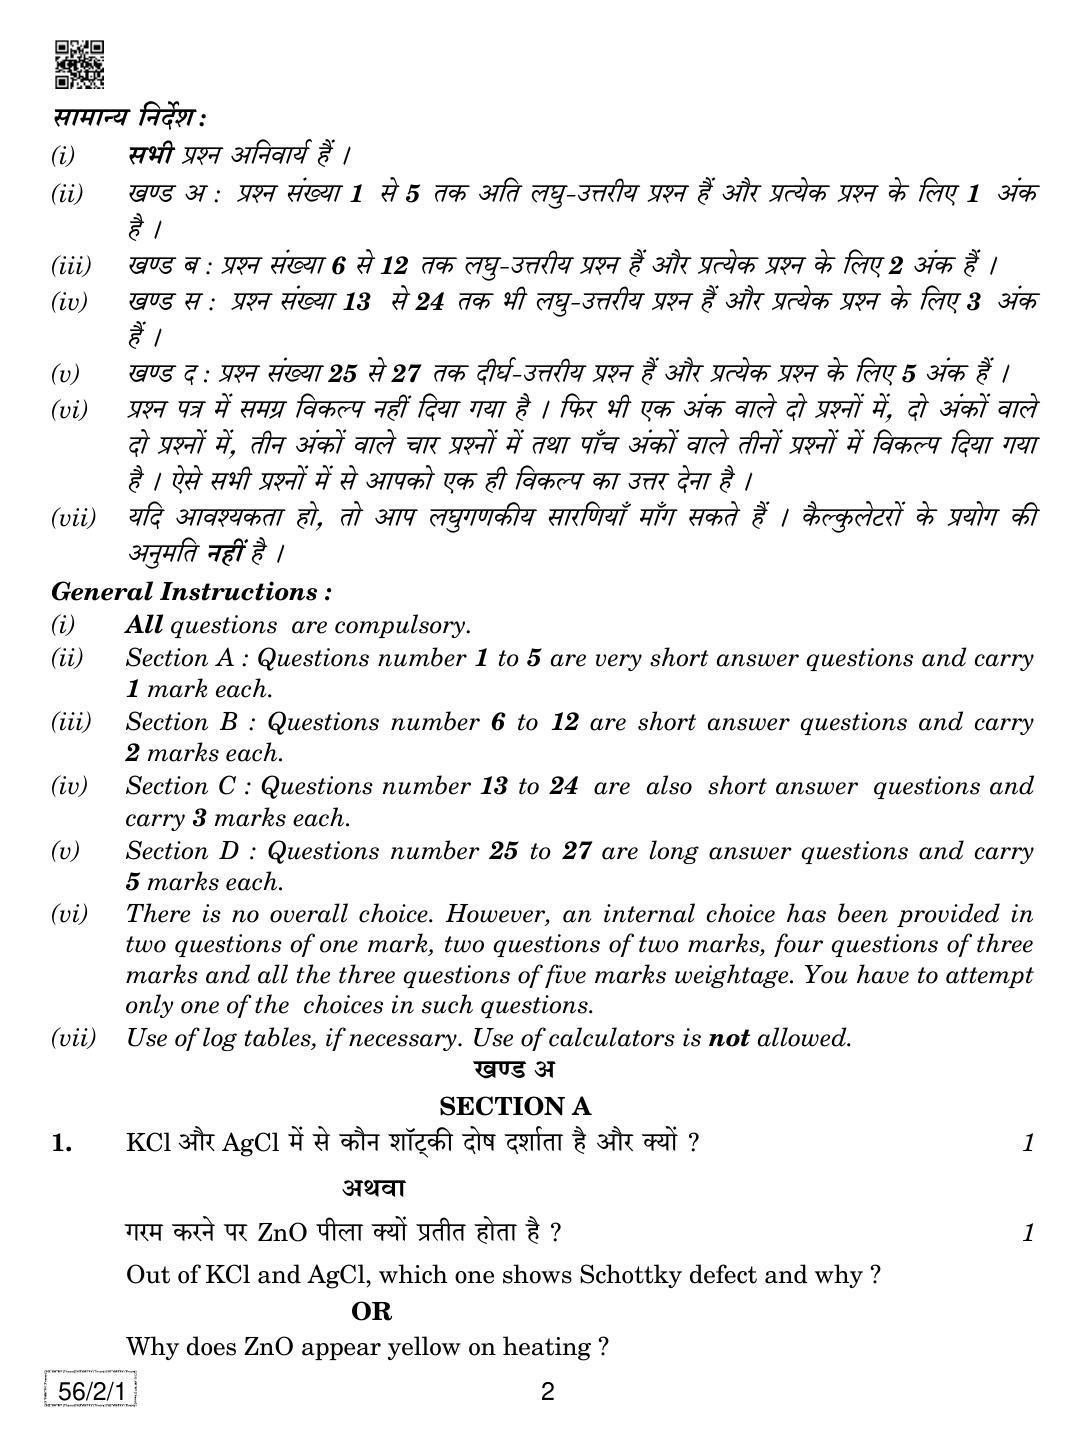 CBSE Class 12 56-2-1 Chemistry 2019 Question Paper - Page 2